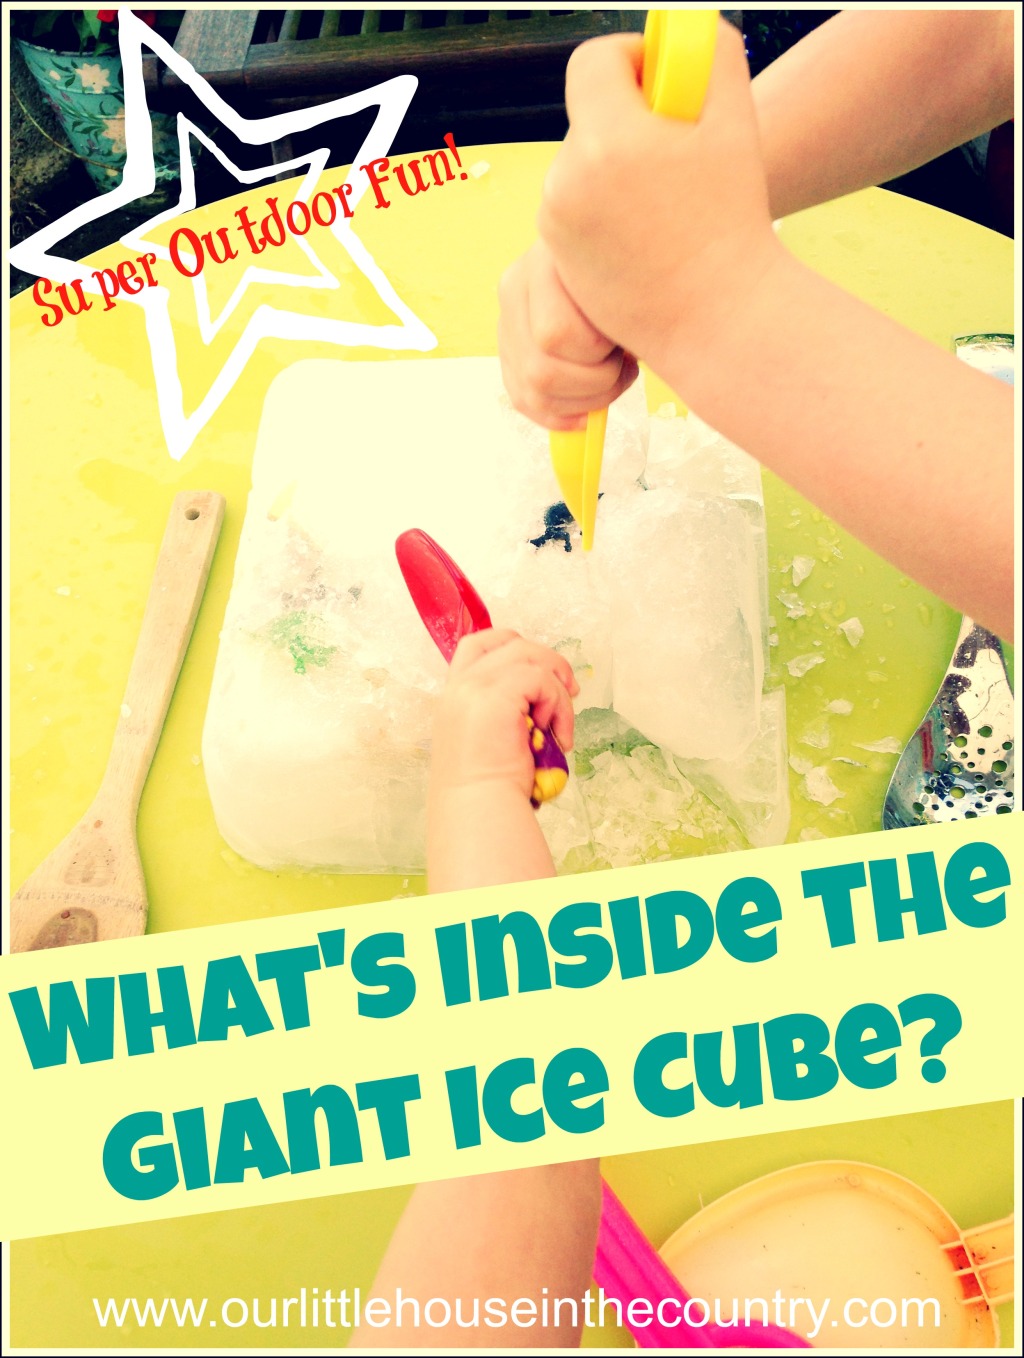 What's Inside The Giant Ice Cube? - Super Outdoor Fun - Our Little House in the Country #iceplay #kidsactivities #gianticecube #summer